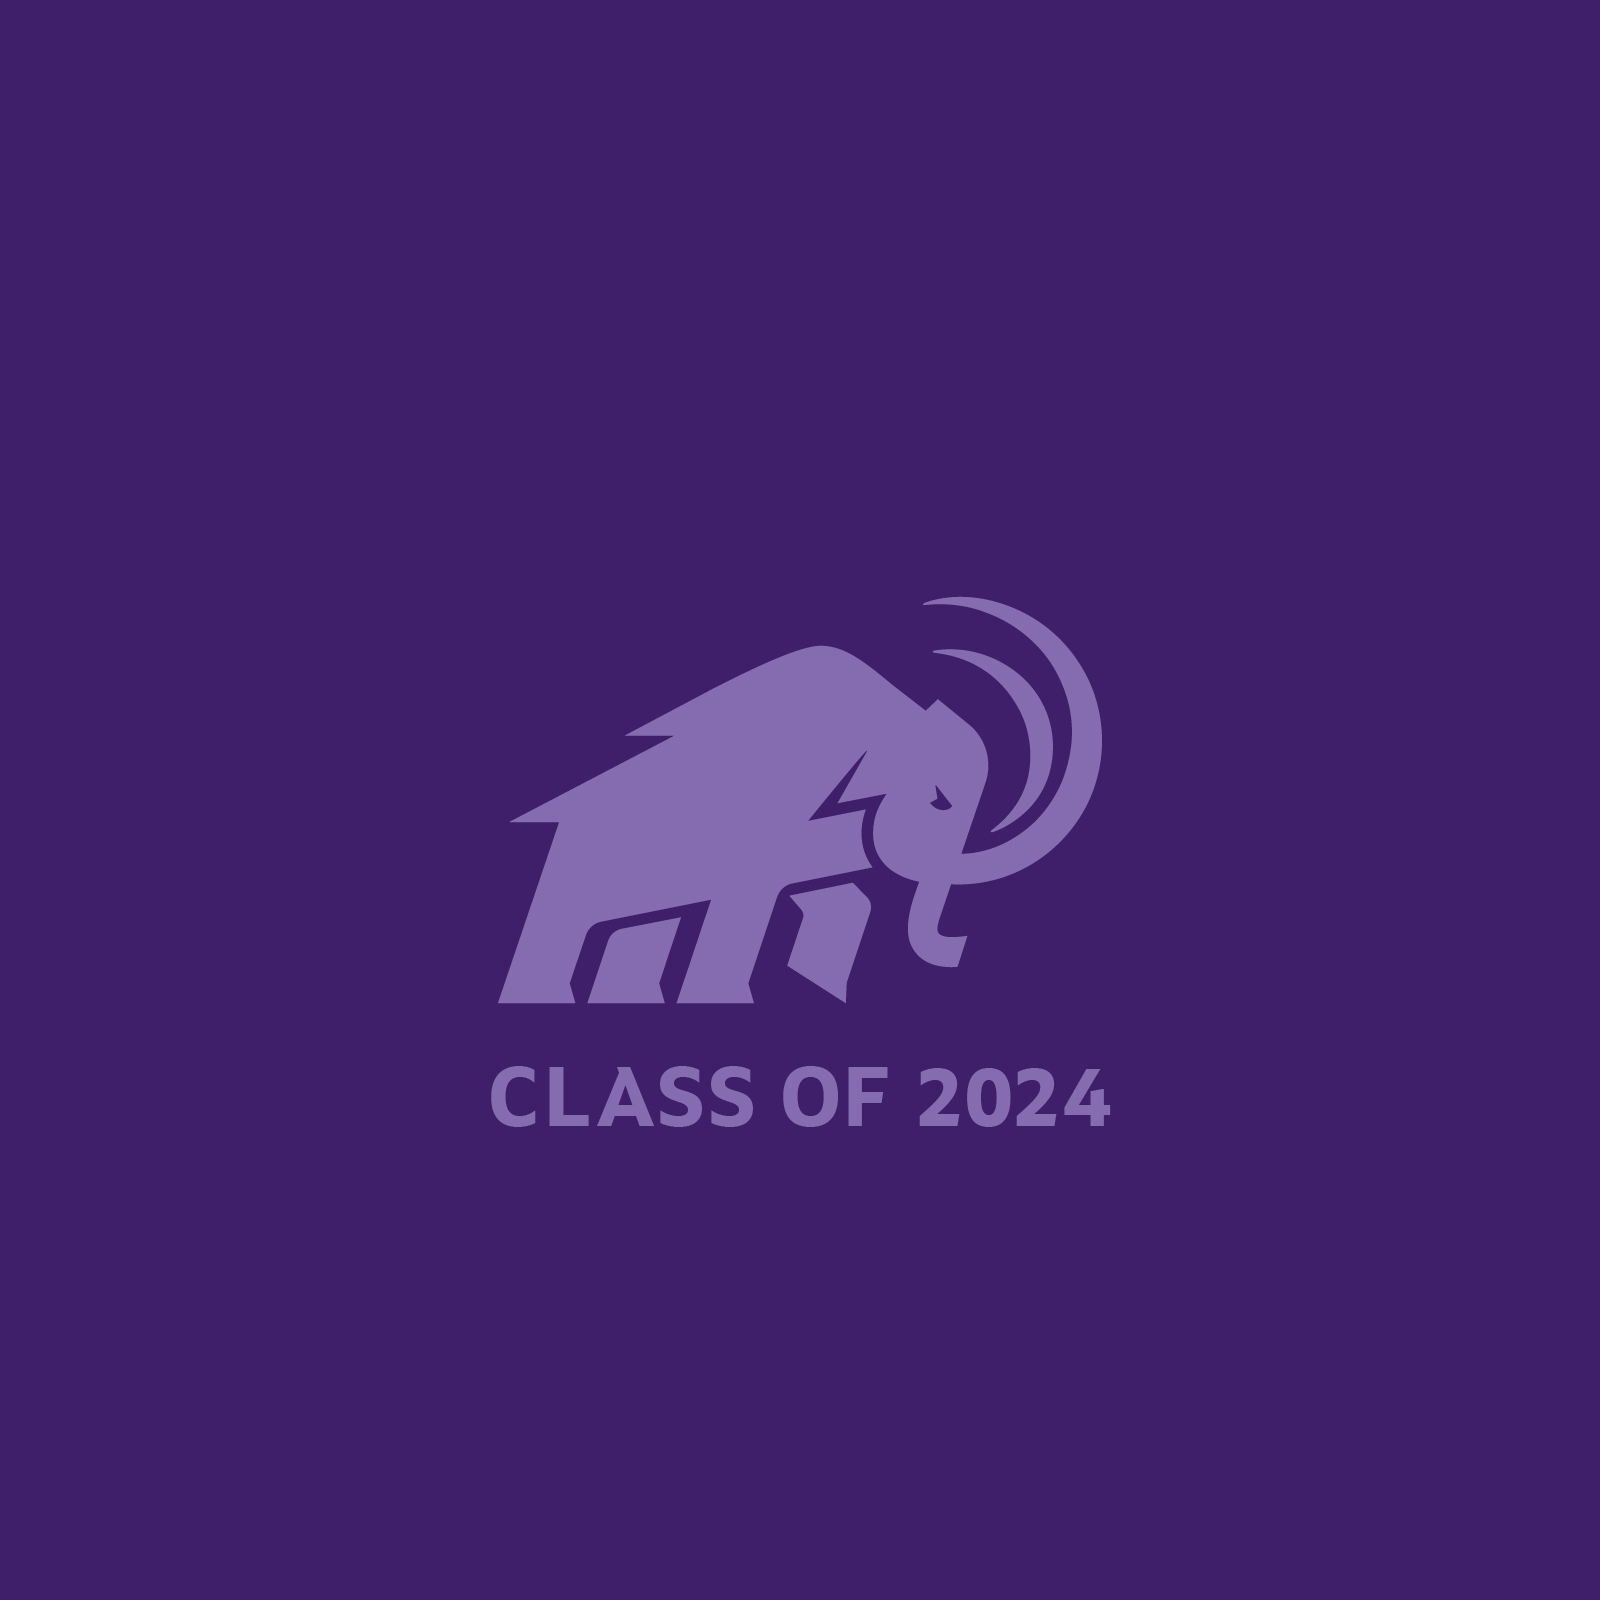 Class of 2024 with mammoth on purple background